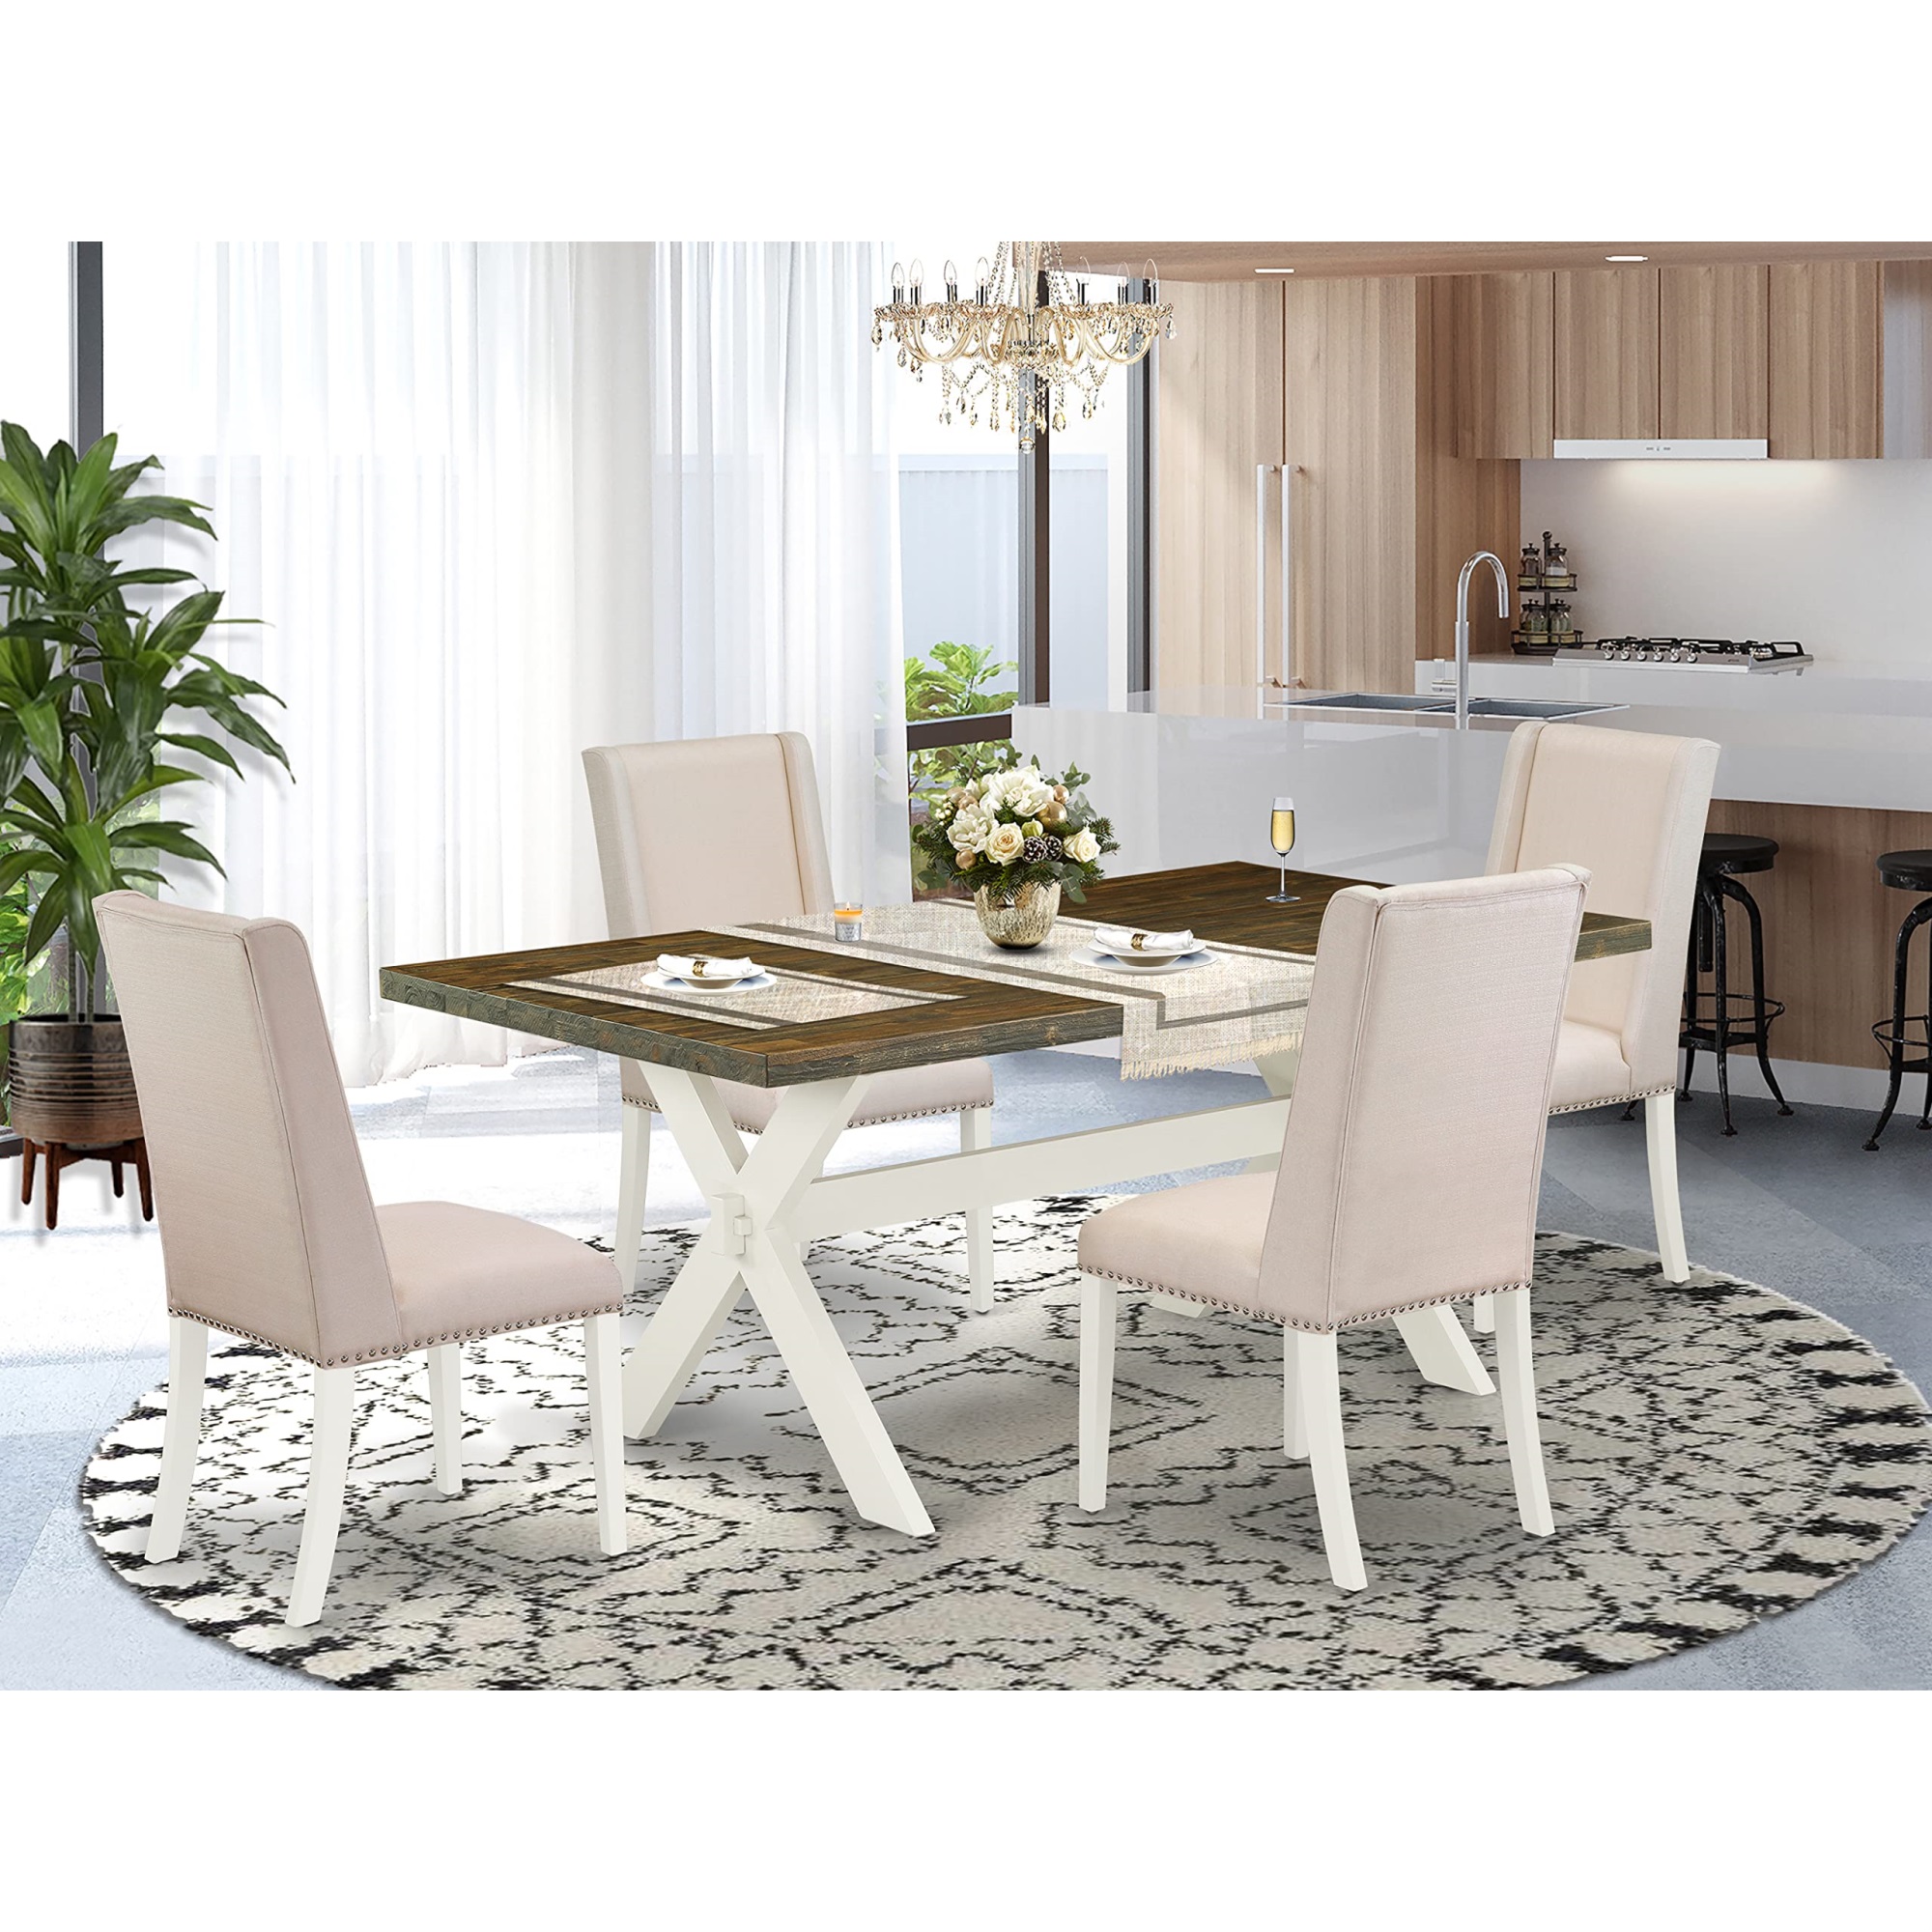 East West Furniture 5-Pc Kitchen Dinette Set Included 4 Dining room chairs Upholstered Nails Head Seat and Stylish Chair Back 